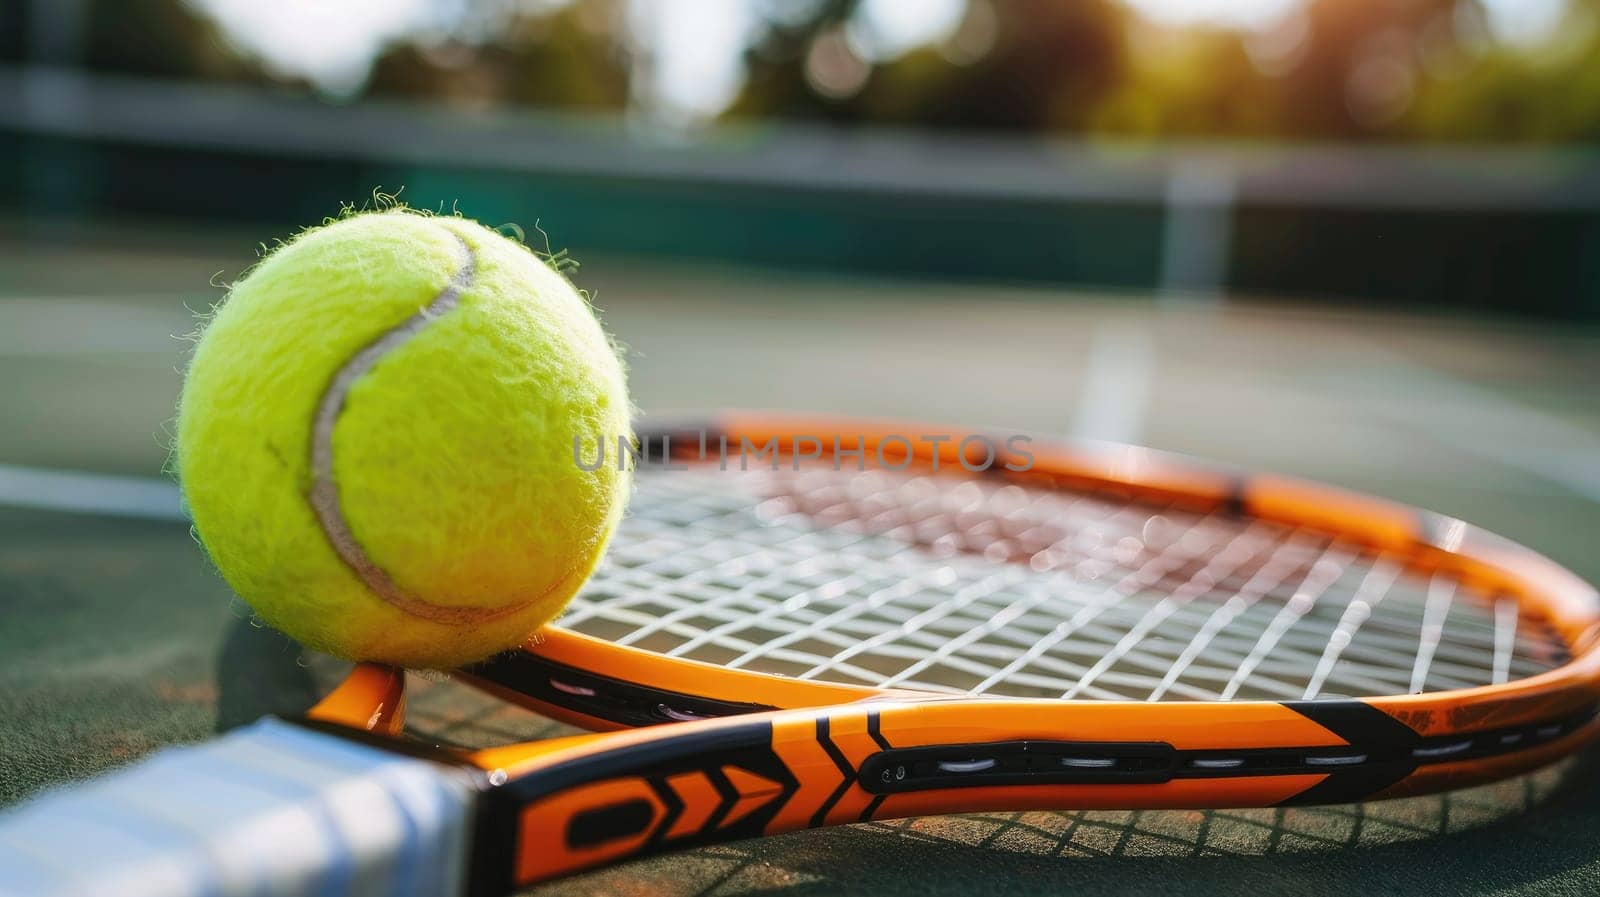 Tennis racket and tennis ball on tennis clay court with copy space for text, Sport and healthy lifestyle wallpaper or background by nijieimu